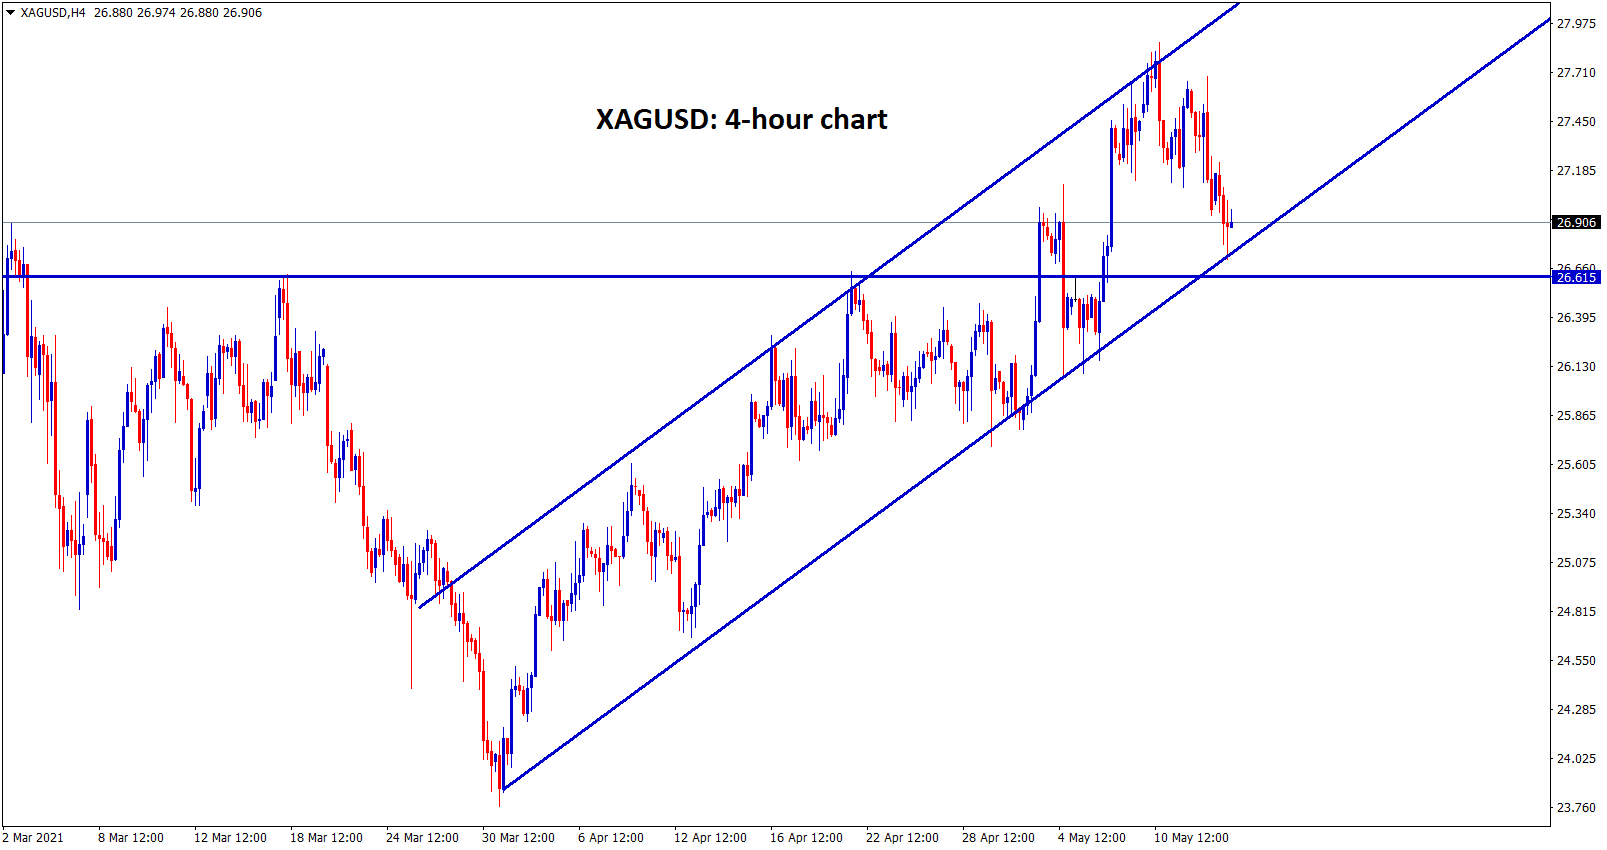 Silver XAGUSD moving in an ascending channel pattern